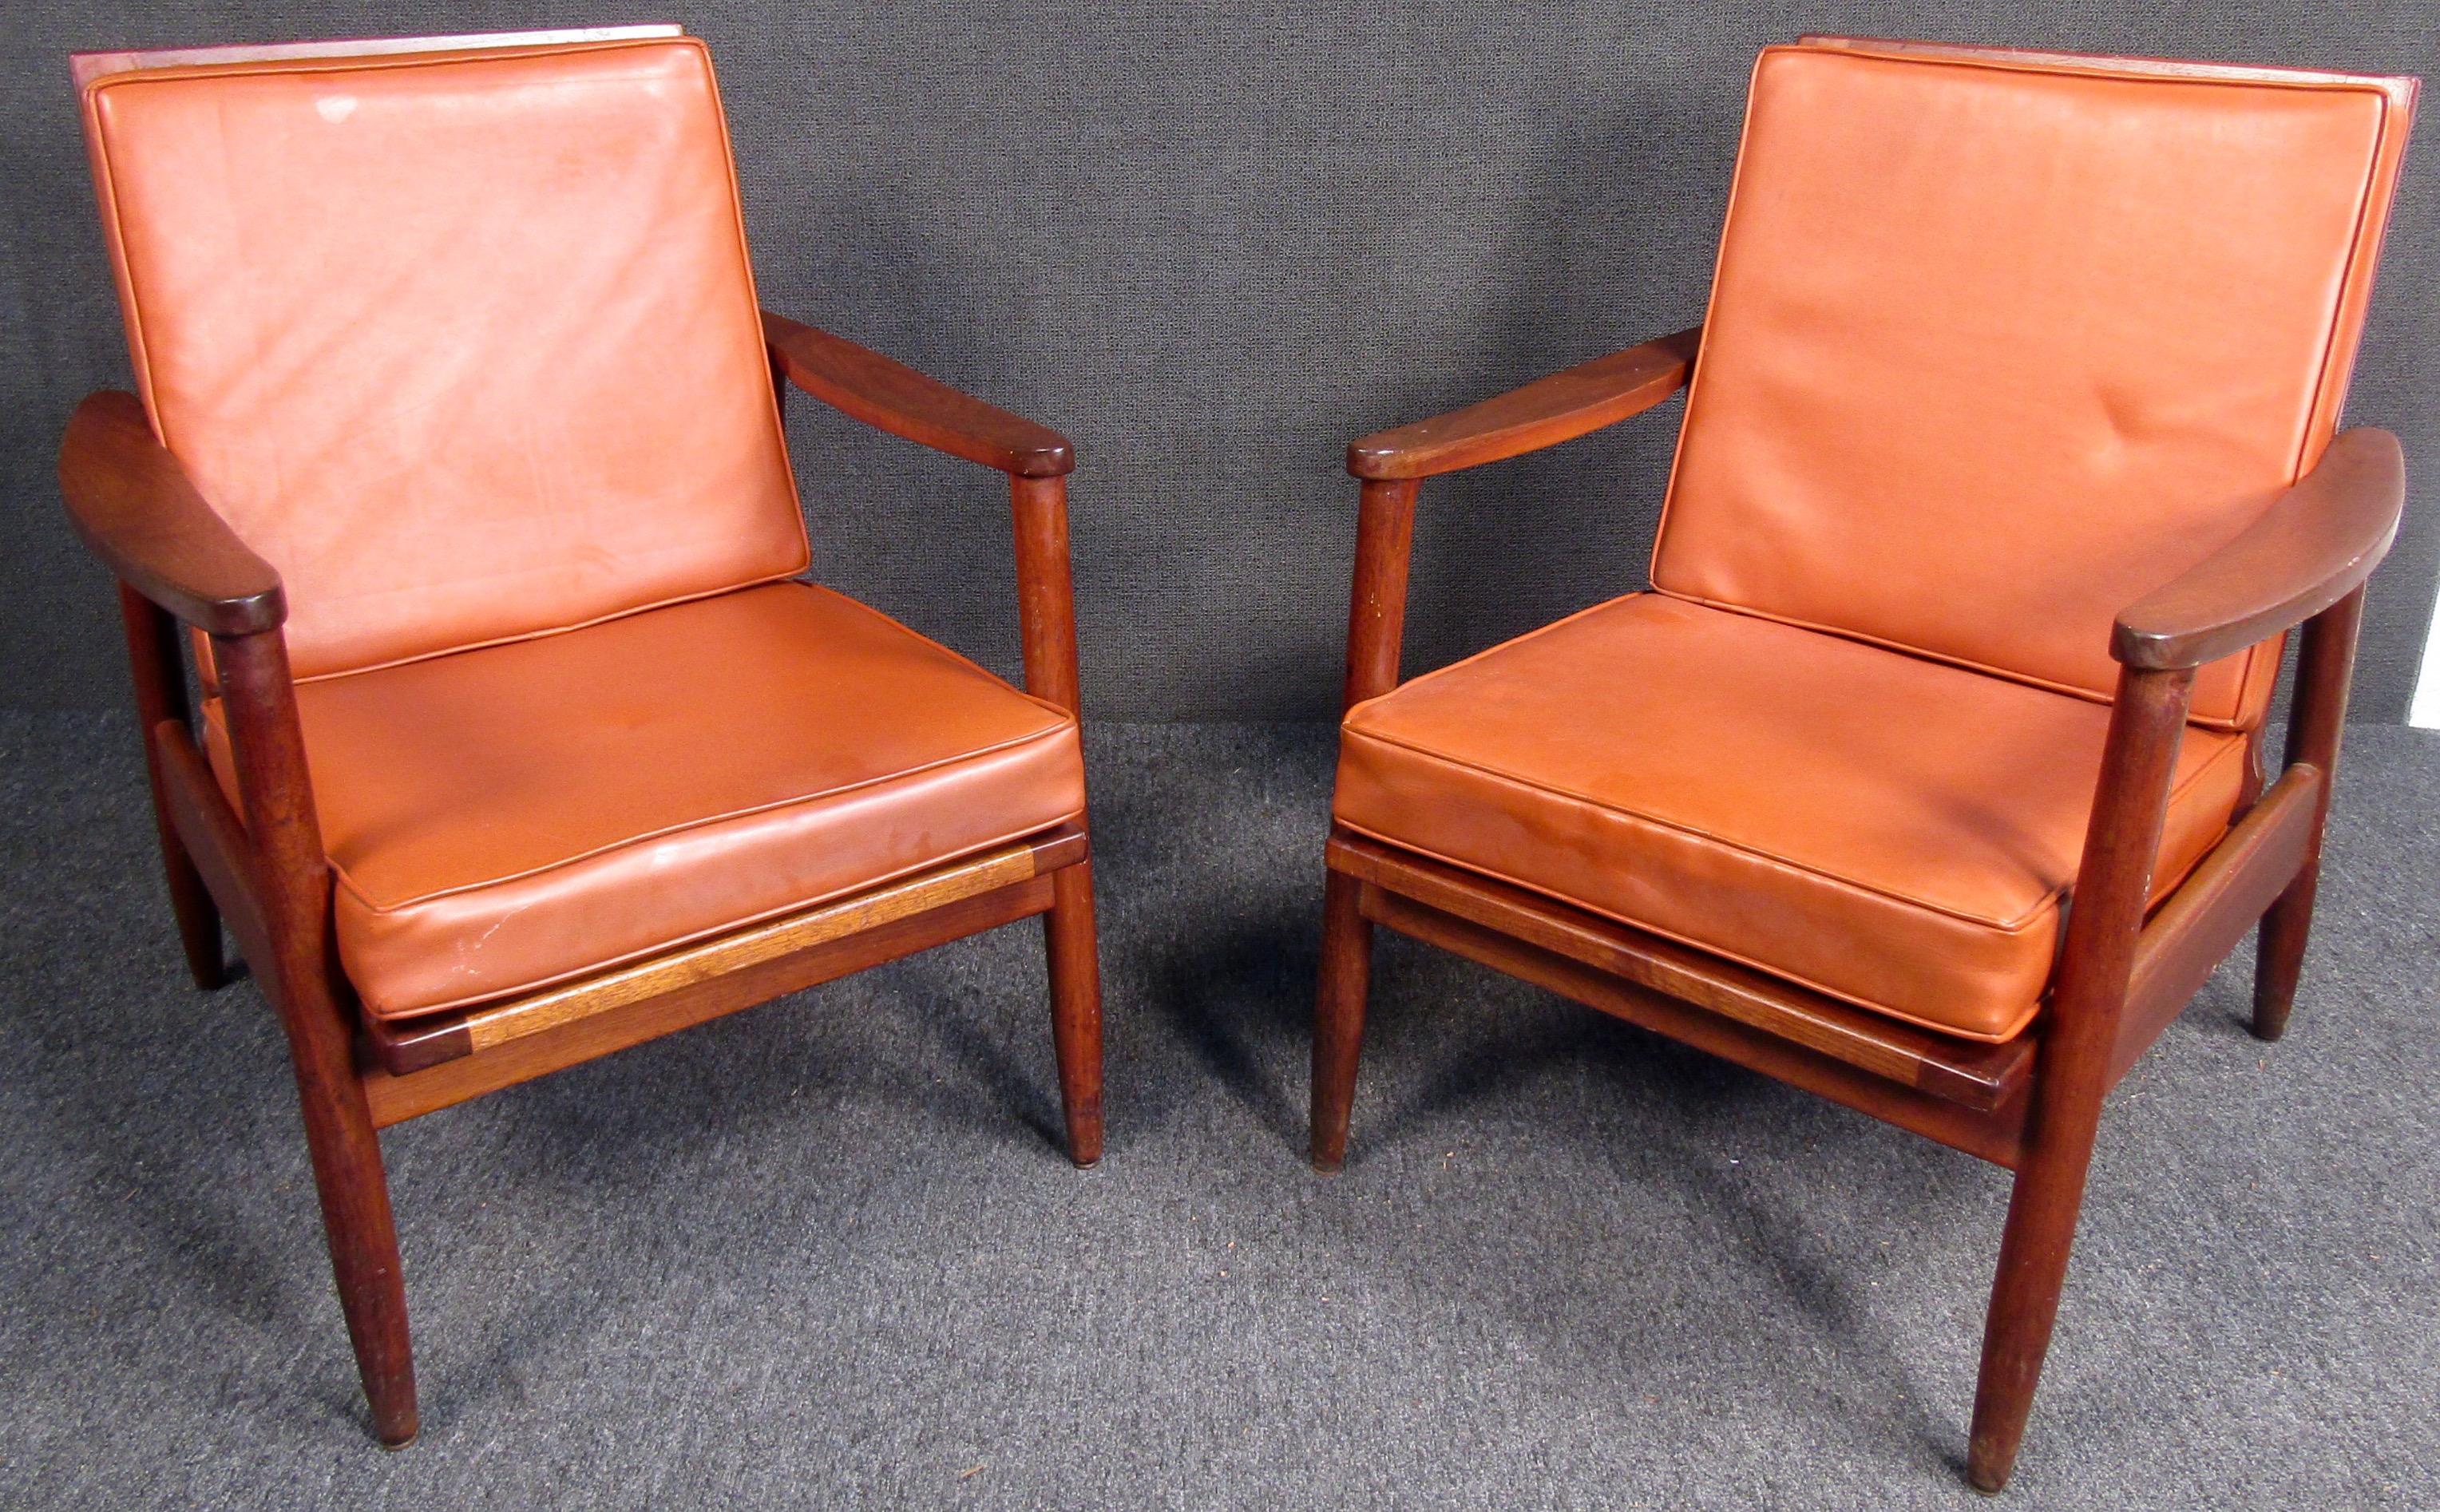 Pair of Vintage Modern Walnut Chairs In Good Condition For Sale In Brooklyn, NY